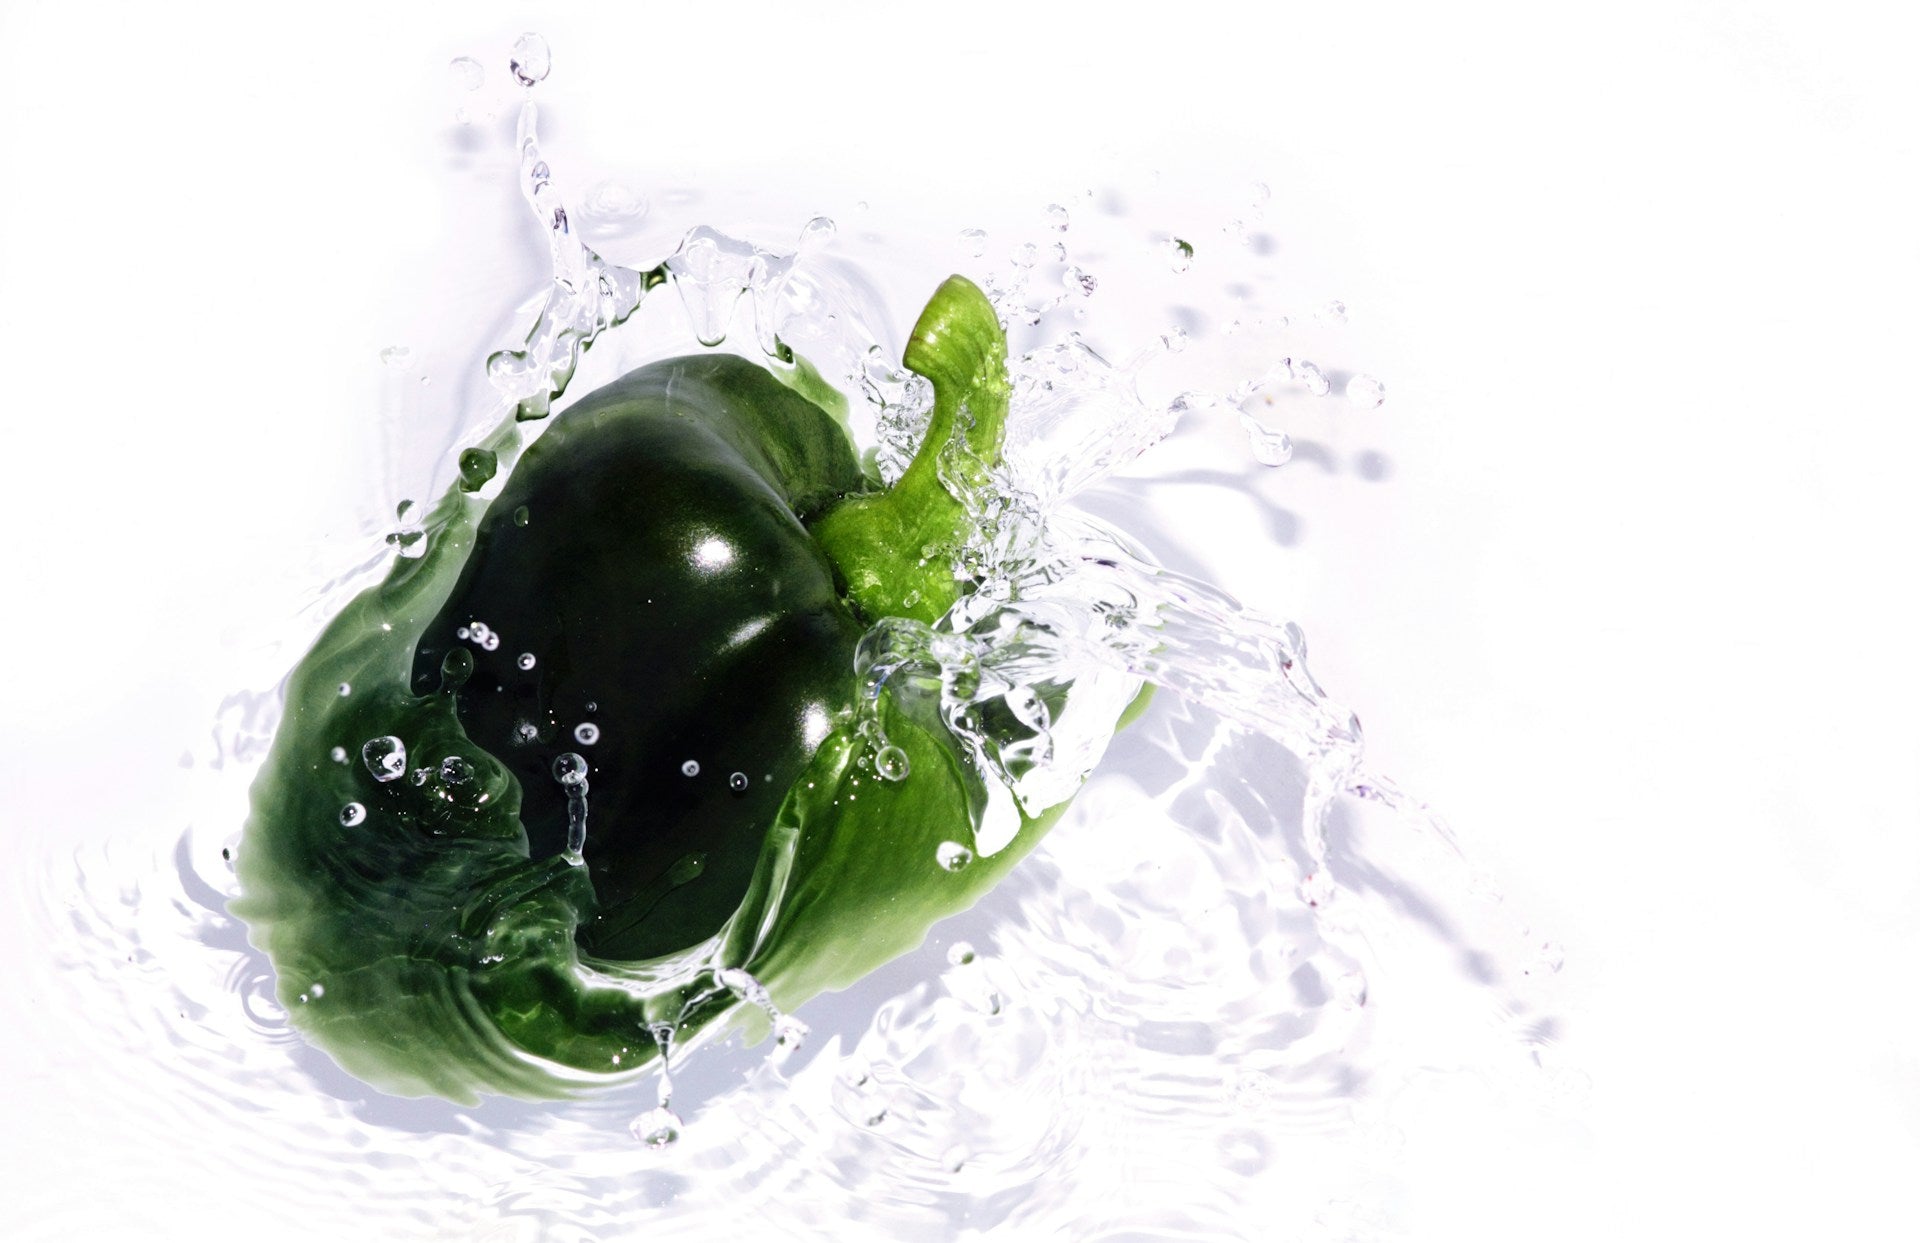 On display is a single green bell pepper, of the variety Sweet Cal Wonder 300 TMR. The pepper appears to be splashing into water, with the image capturing the immediate splash and the clear water droplets being ejected away from the splash zone. There appears to be a light source from the left, creating shadows that capture the water waves moving away. Shadows are also visible for the droplets and water that has been ejected into the air. 